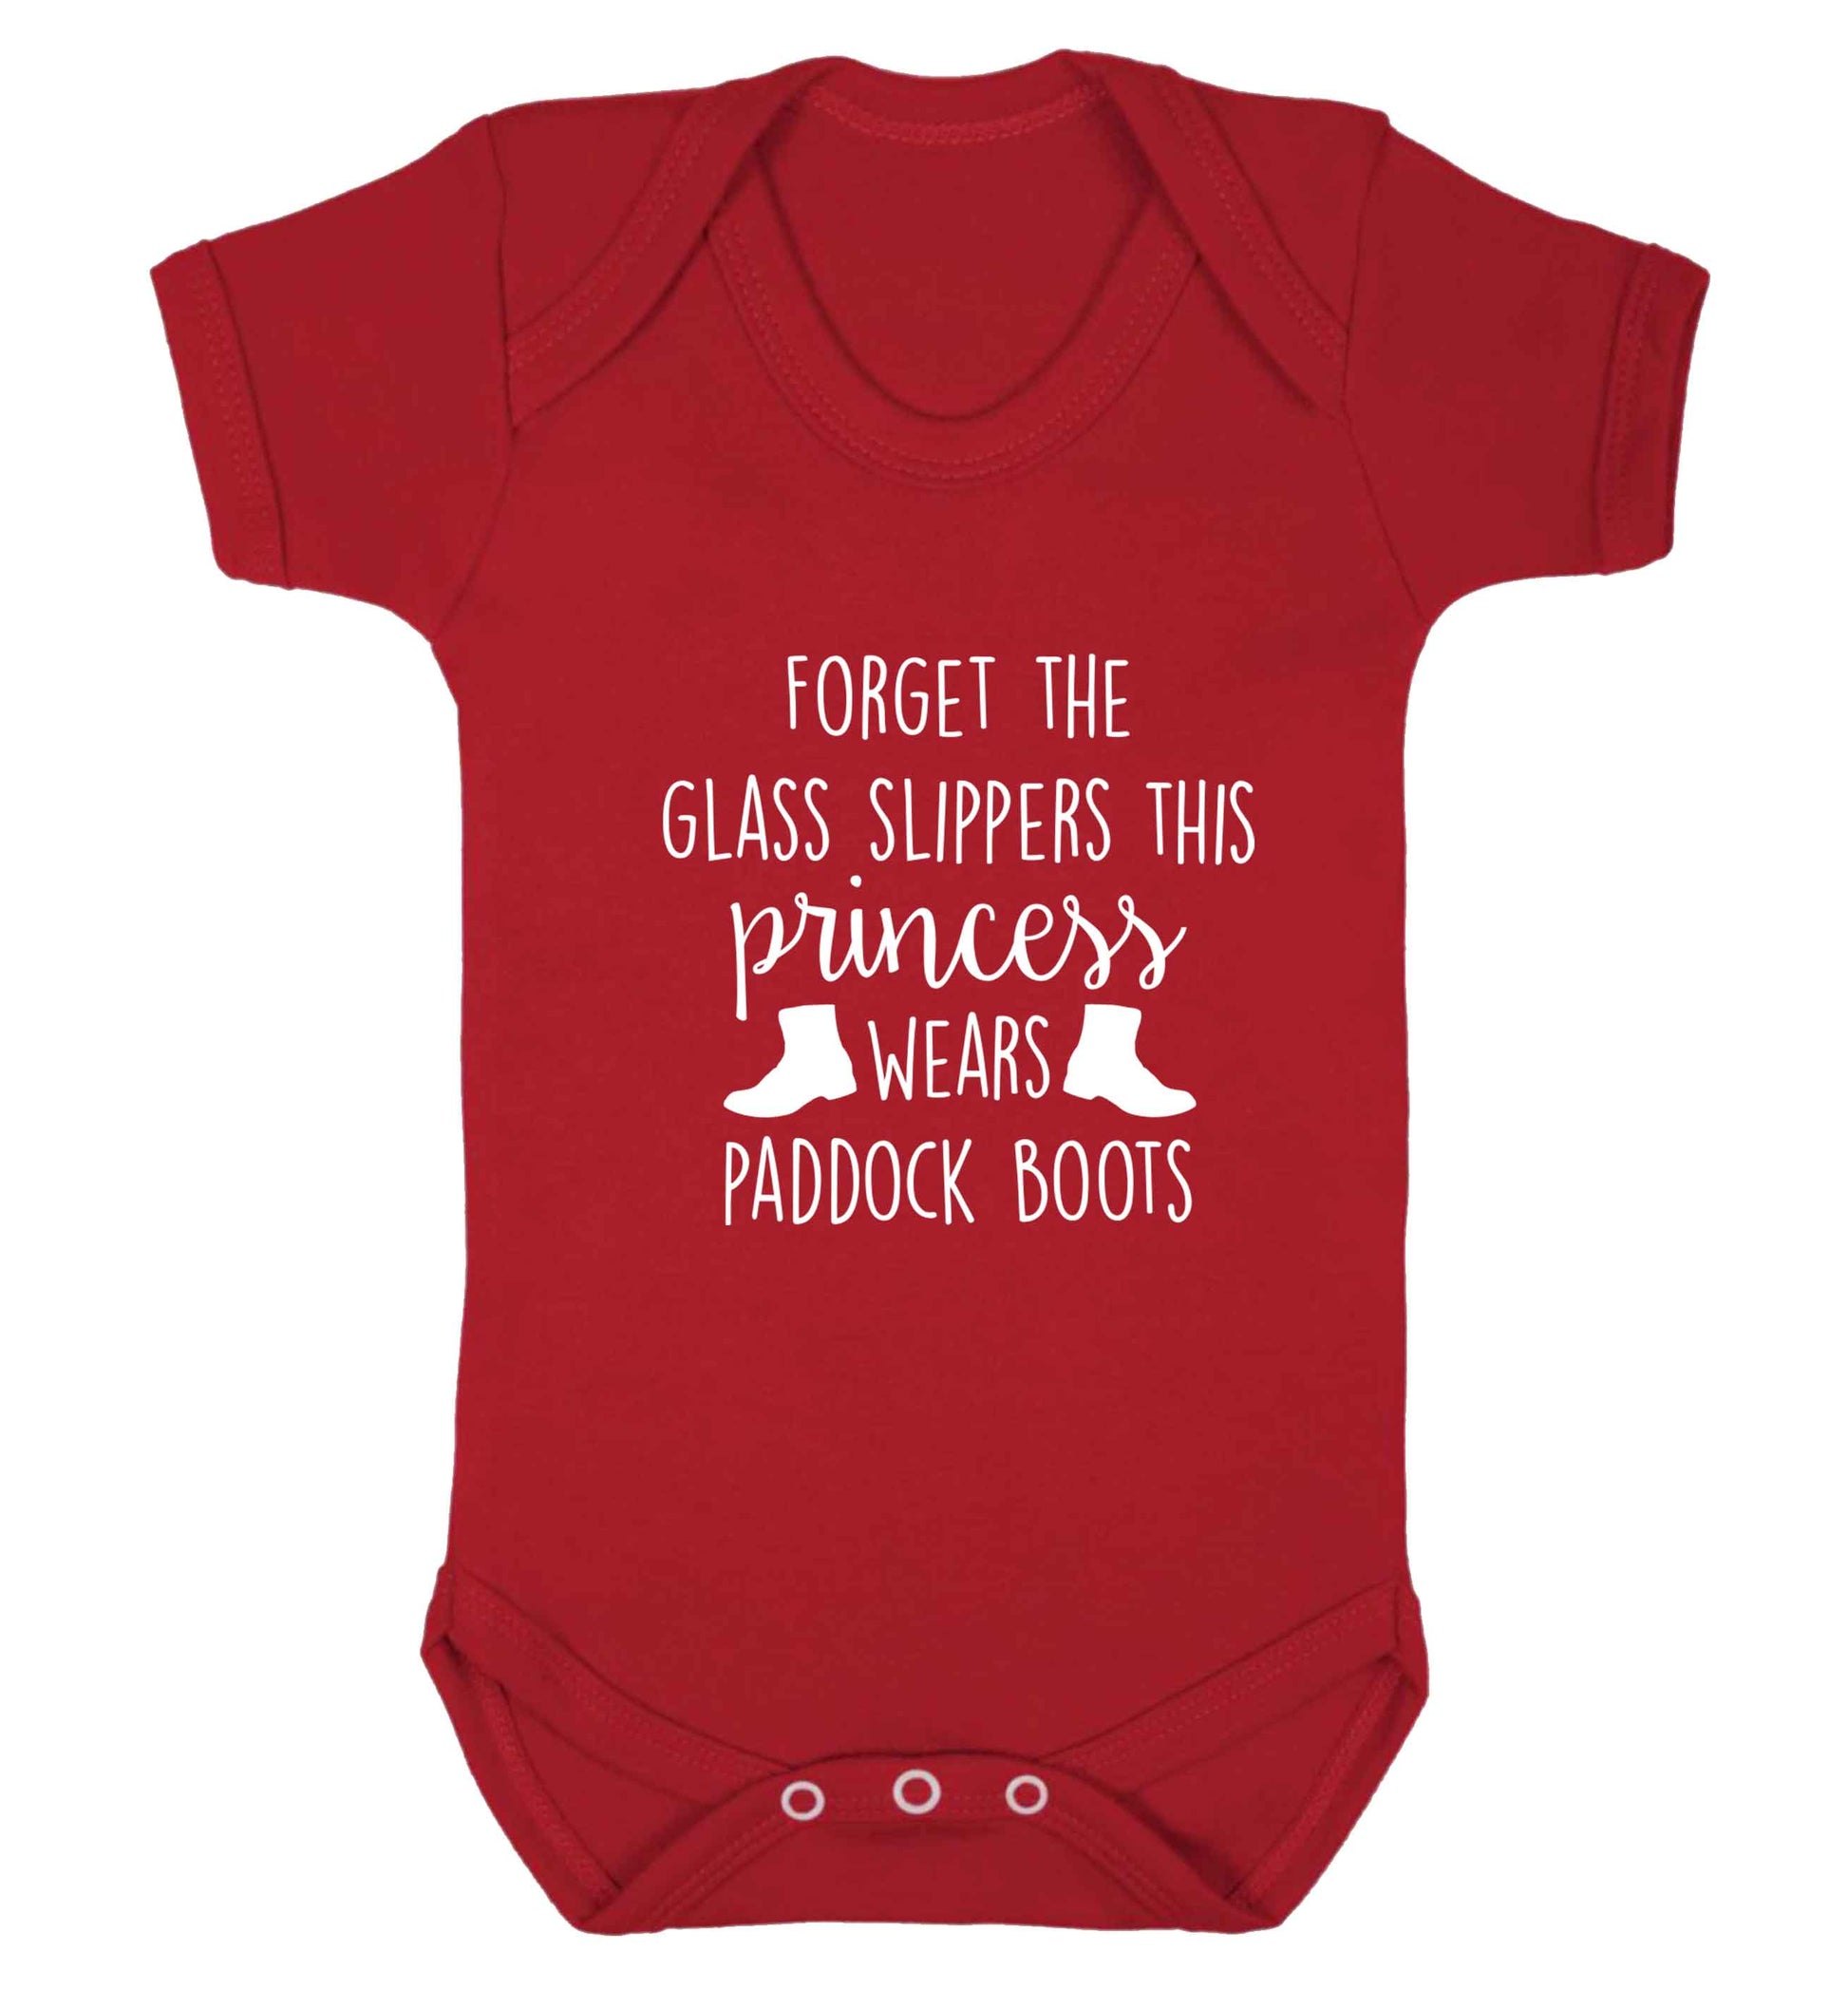 Forget the glass slippers this princess wears paddock boots baby vest red 18-24 months